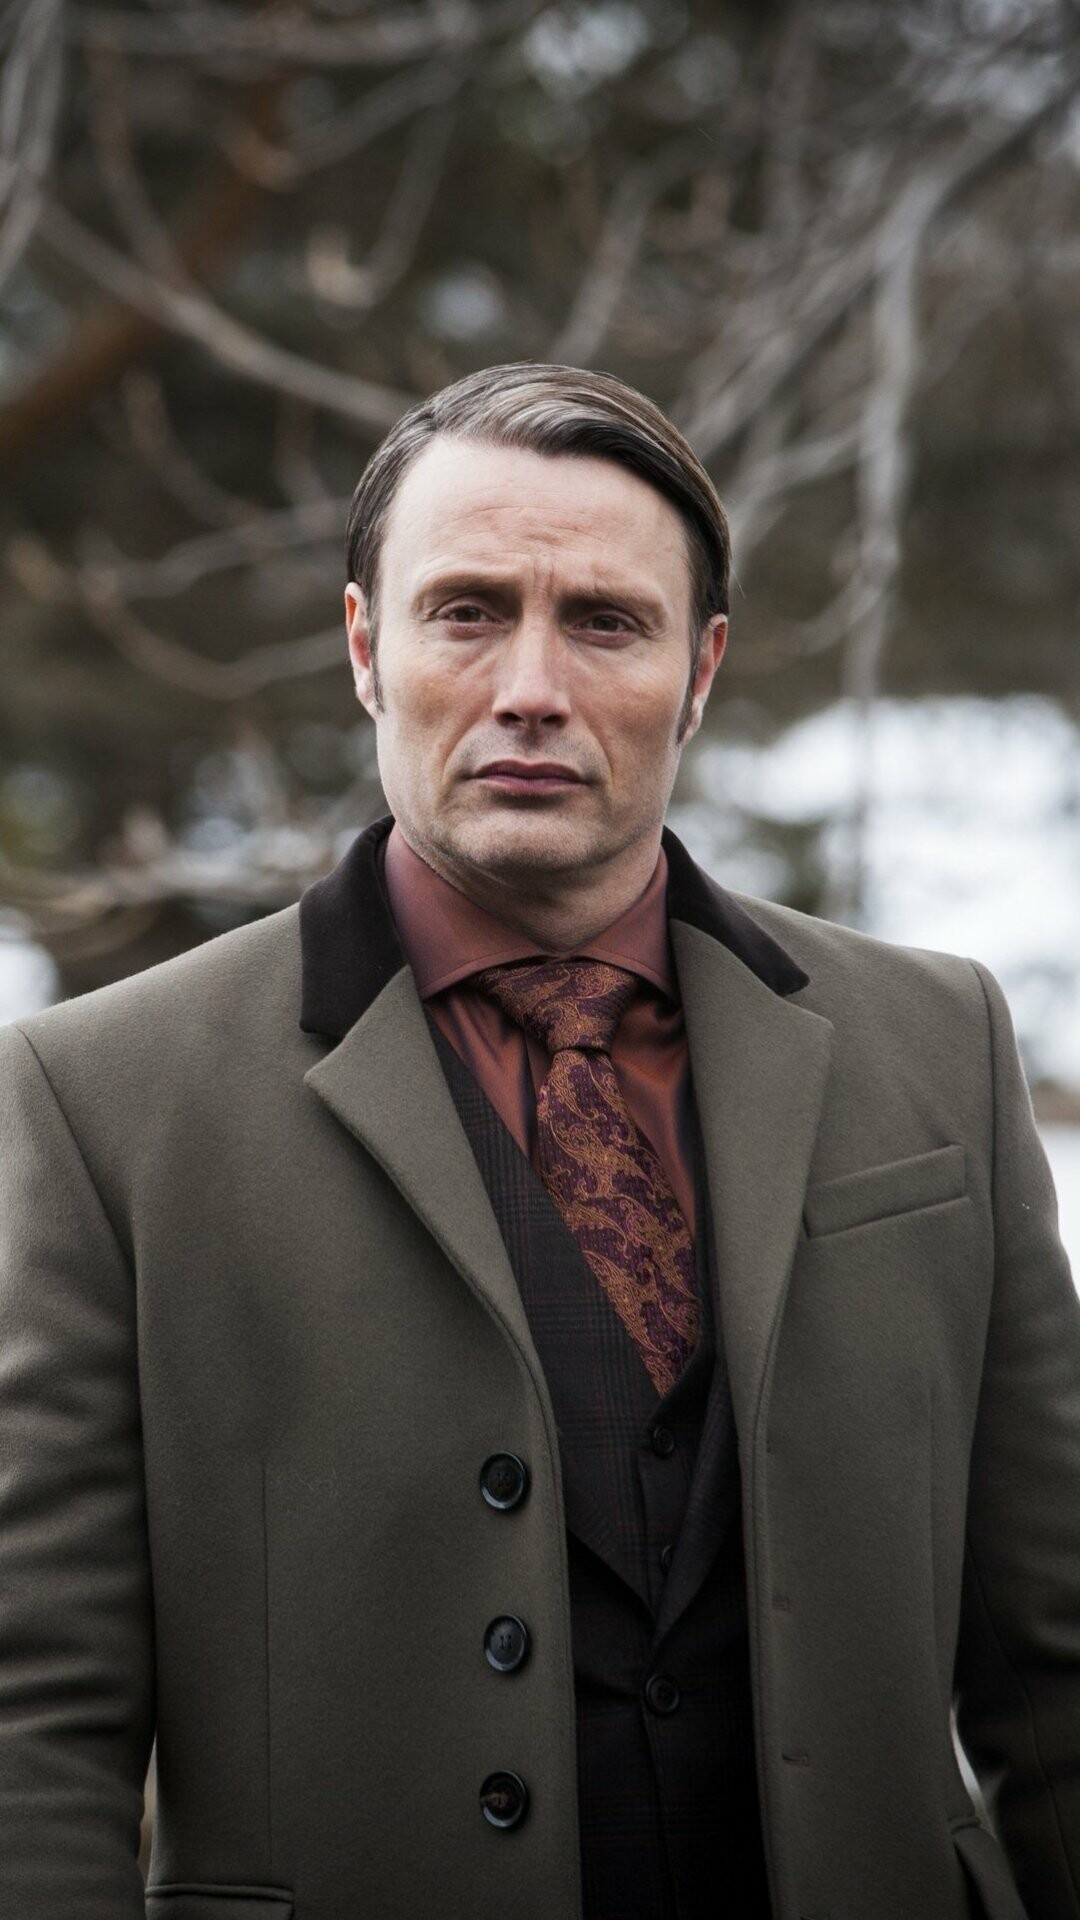 Hannibal (TV Series): Dr. Lecter, a psychiatrist who works with Special Agent Will Graham to track down serial killers. 1080x1920 Full HD Wallpaper.